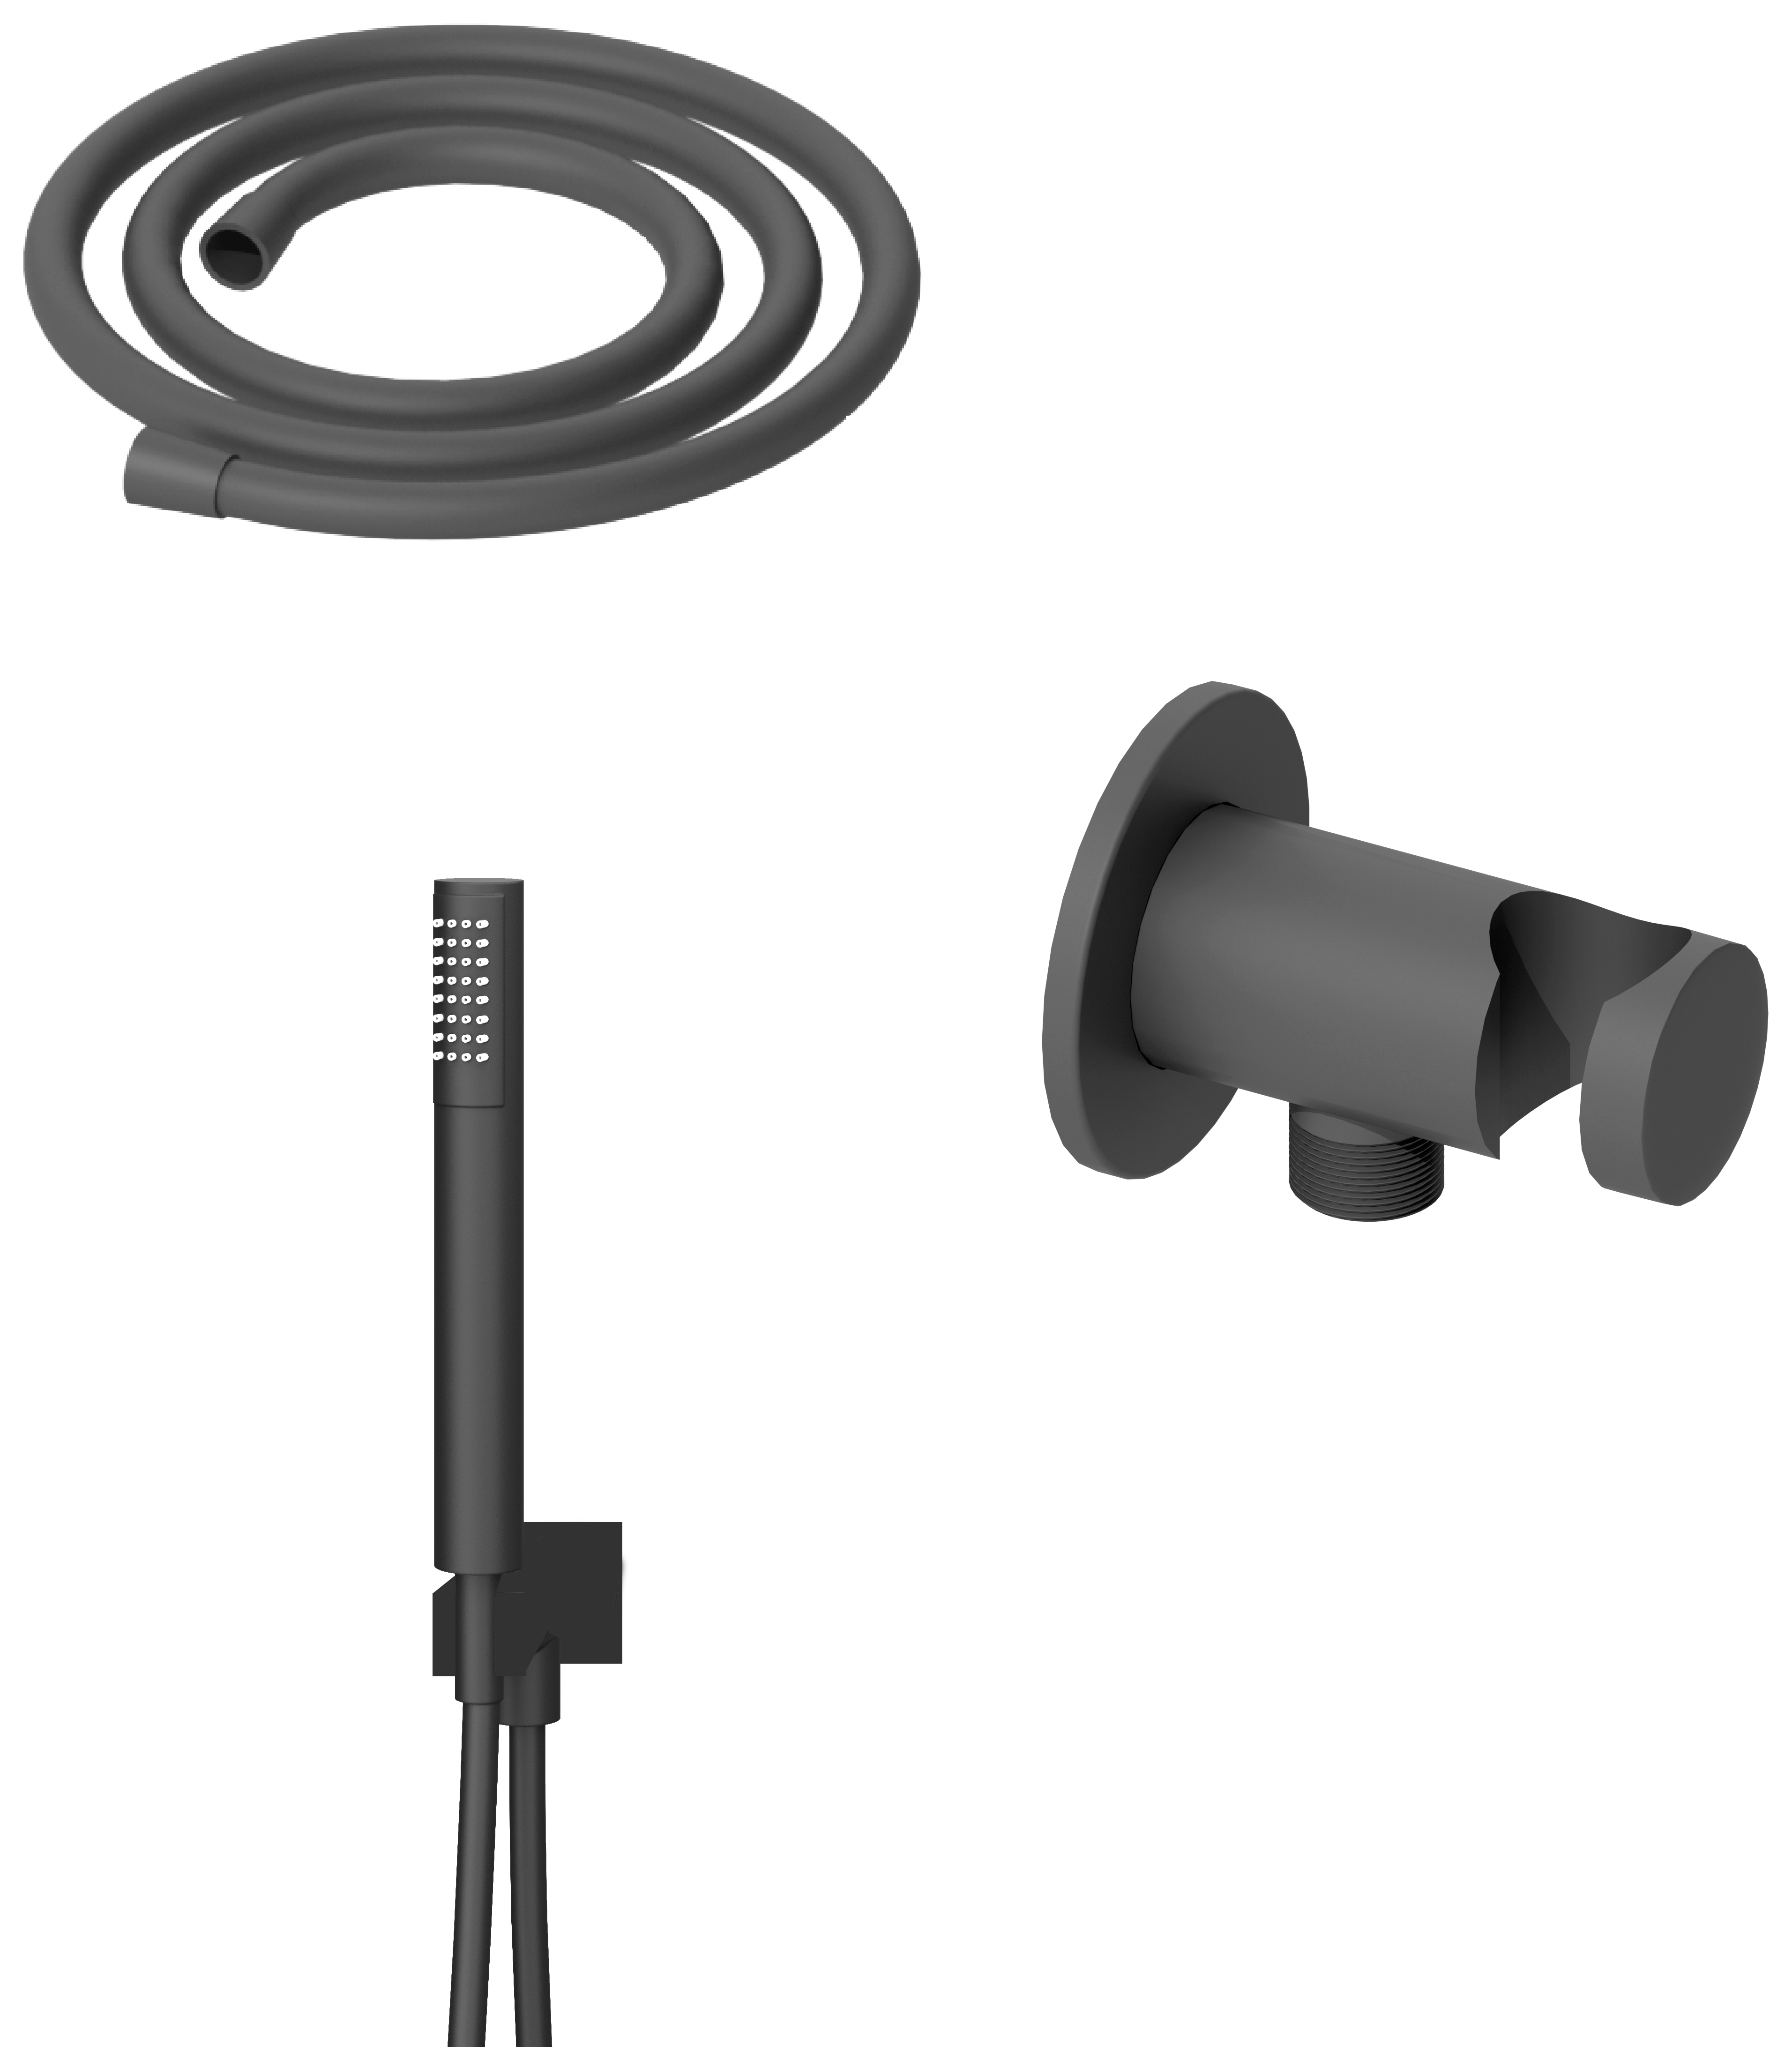 Image of Hadleigh Shower Wall Outlet & Holder, 1.25m Hose & Handset Accessories Kit in Matt Anthracite